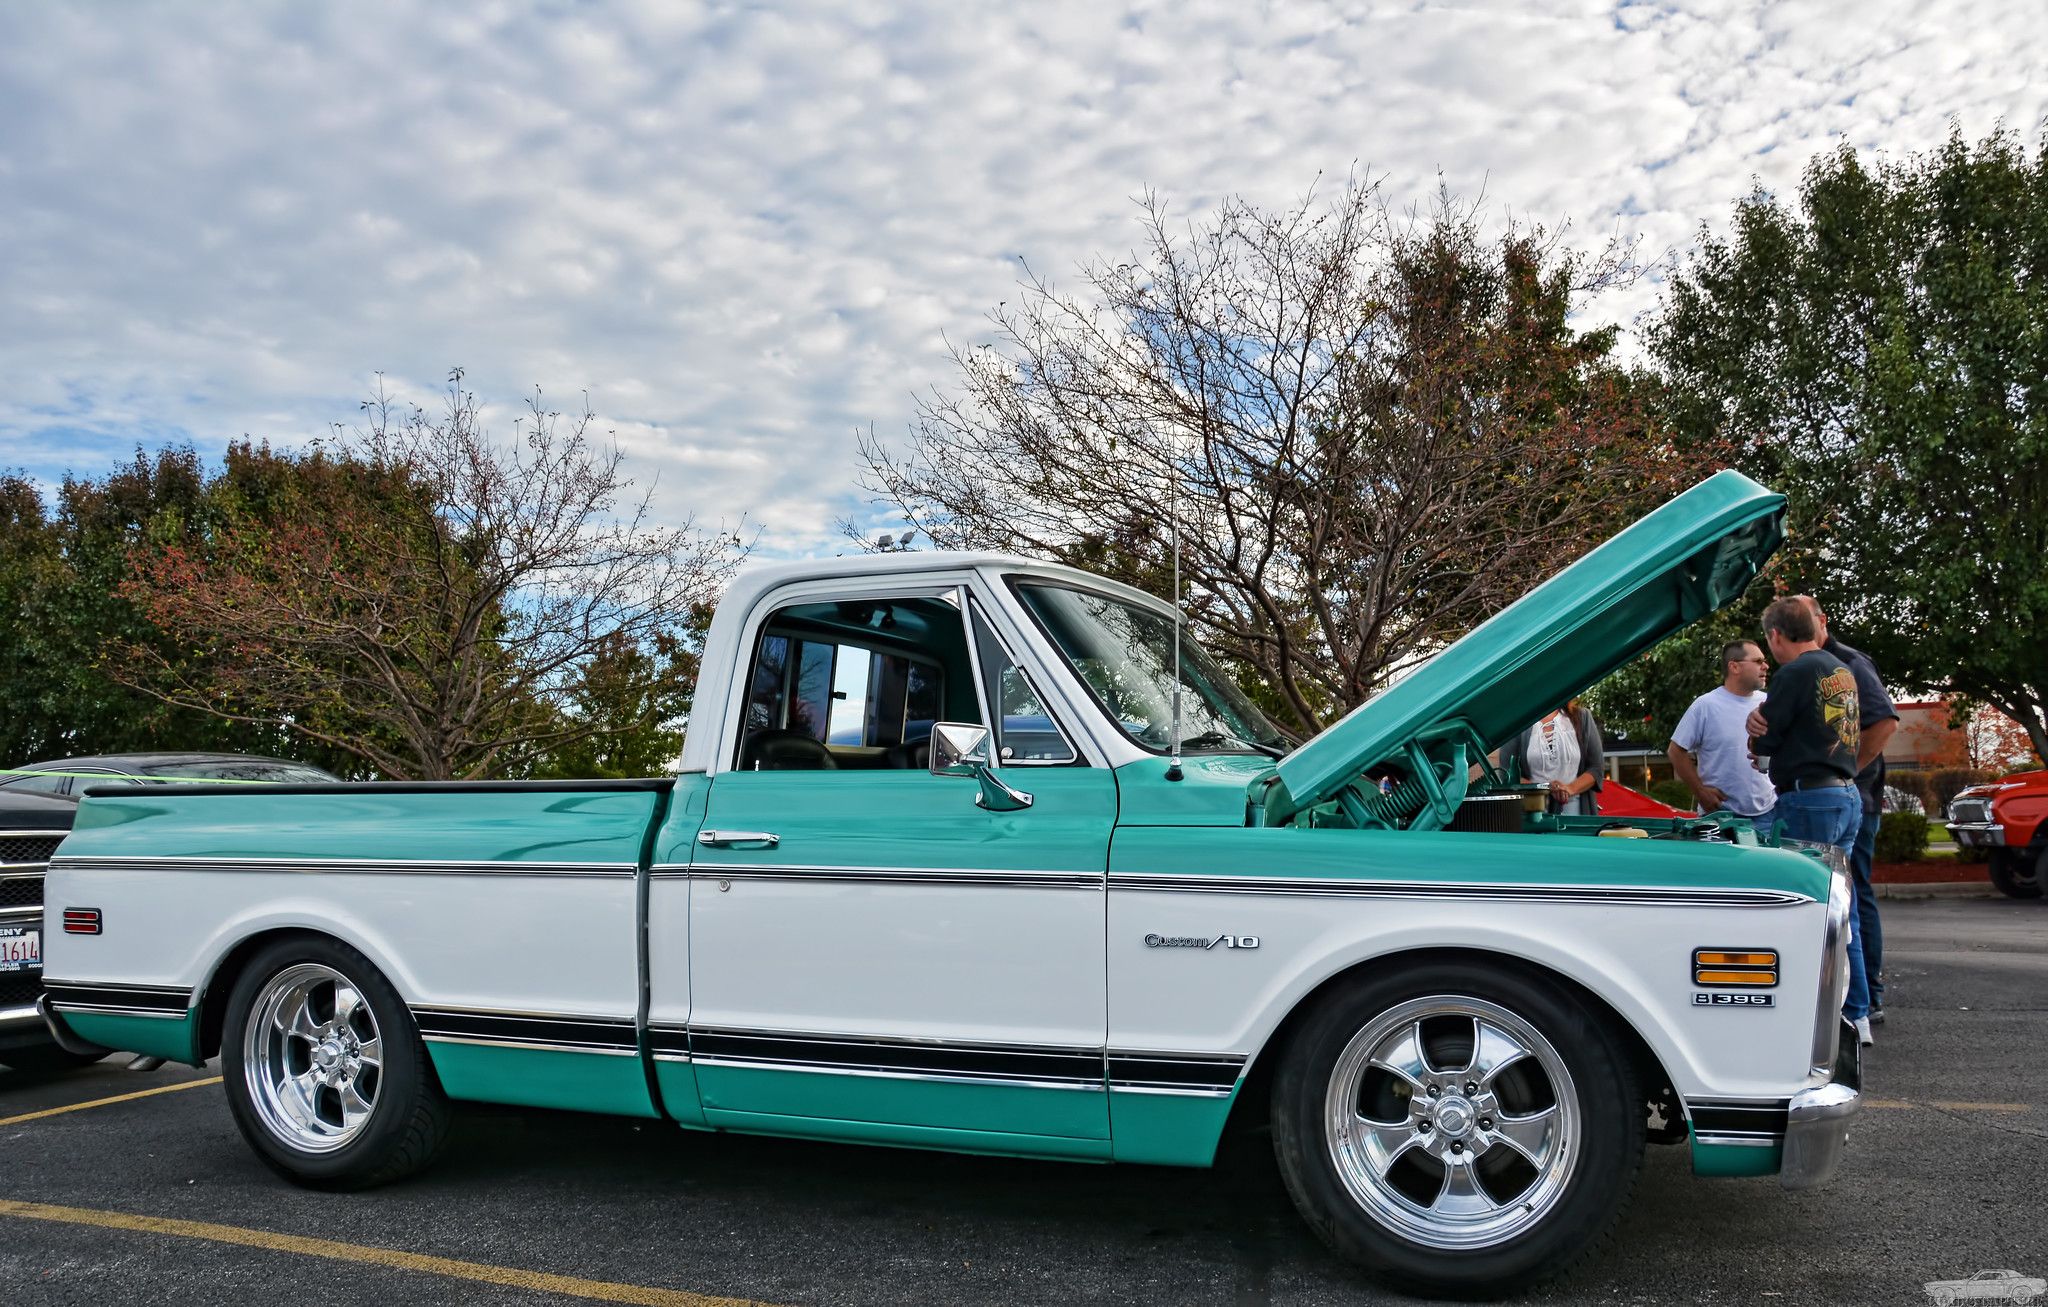 The 1972 Chevrolet C10 with the lifted hood.